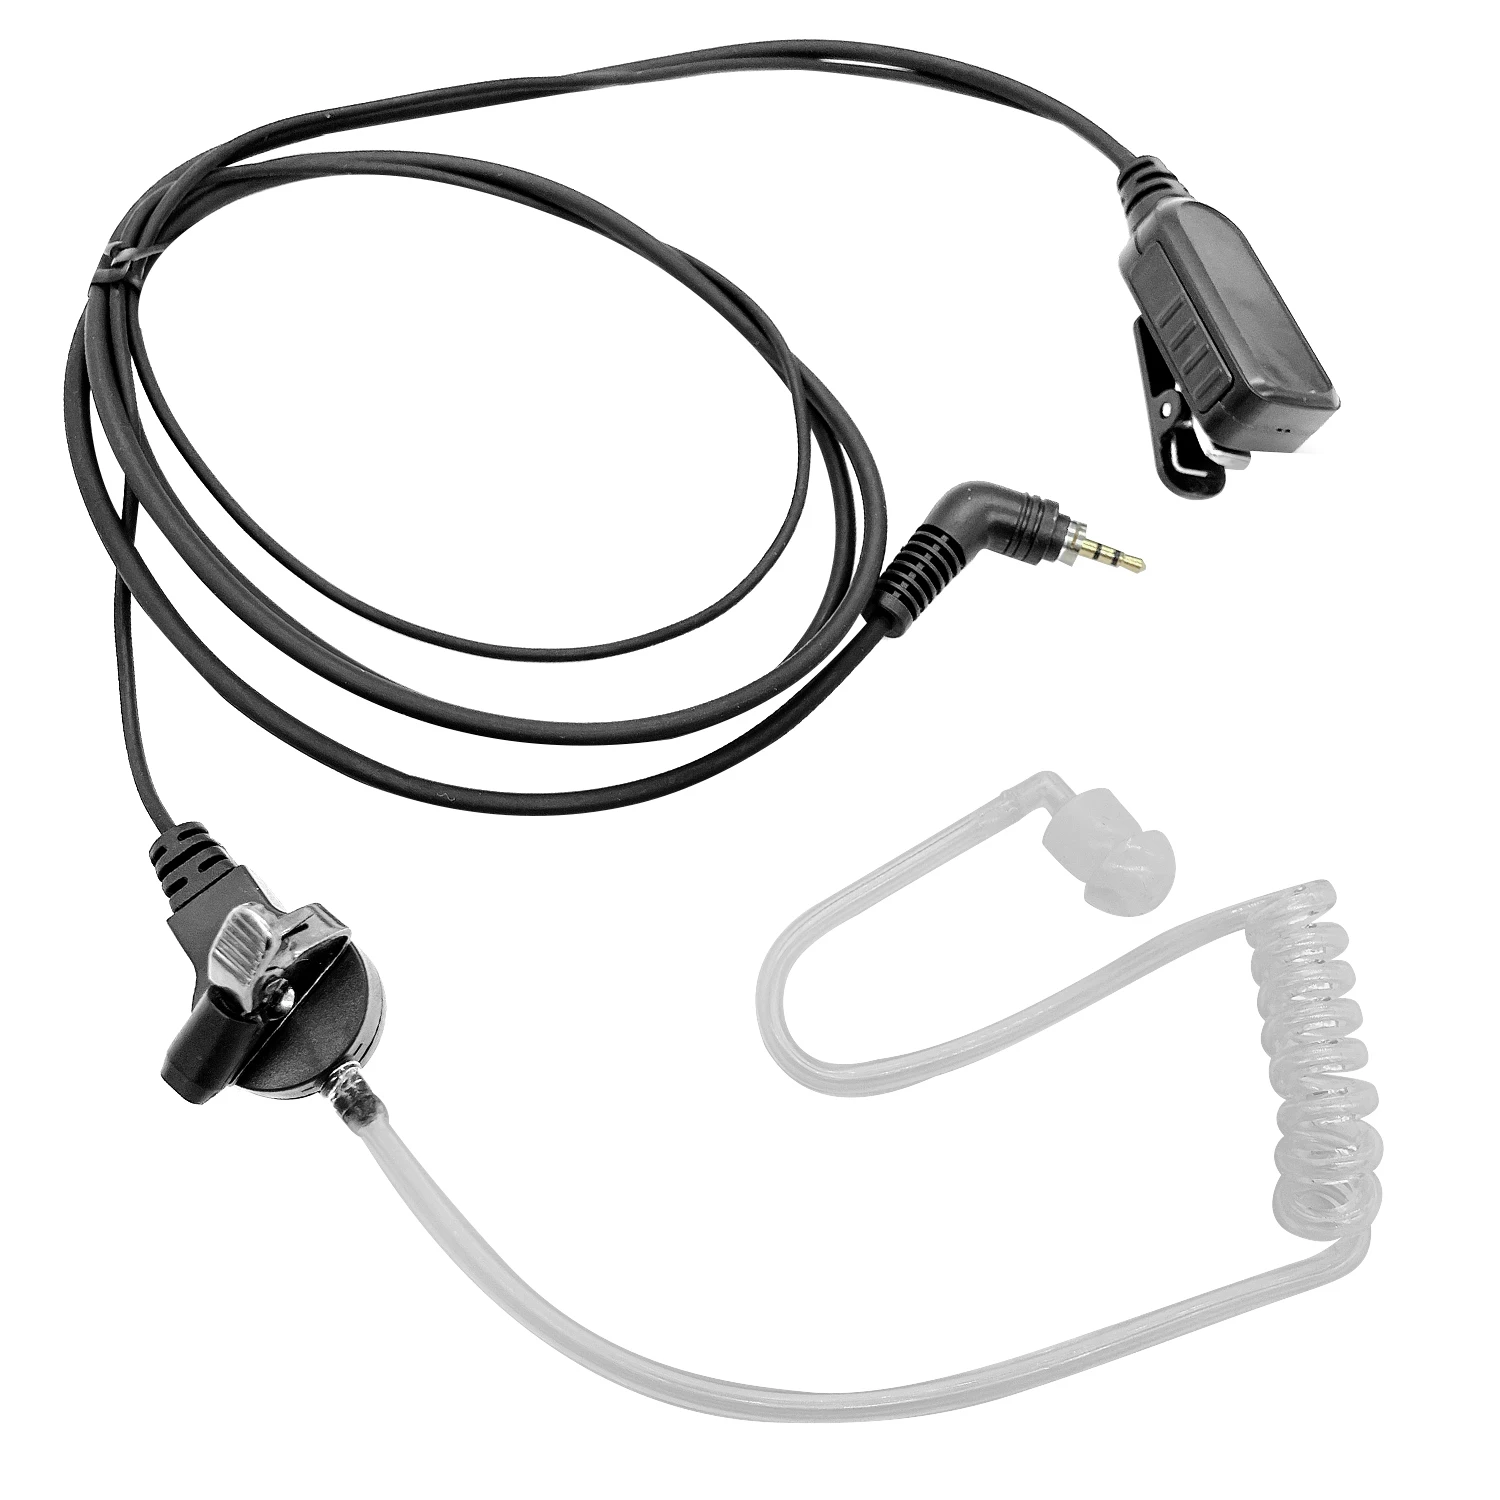 Earpiece walkie talkie headest Compatible with the following Models for motorola Two Way Radio:MTP850